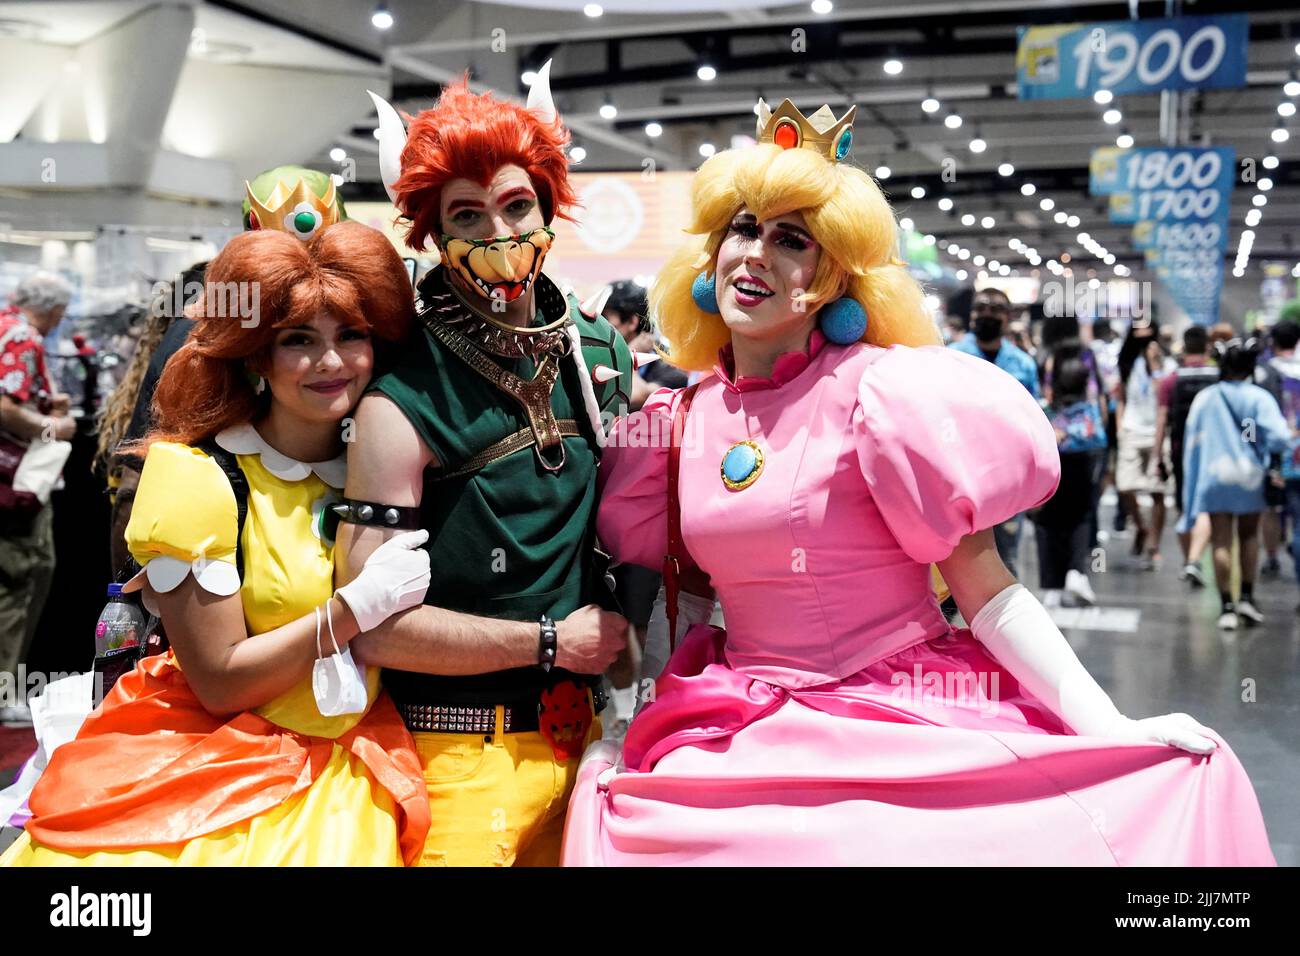 Karamia Capri (L), Alec Crow, and Jimmy Sherfy cosplay as Princess Daisy,  Bowser, and Princess Peach from the Mario video games at Comic-Con  International in San Diego, California, U.S., July 23, 2022.